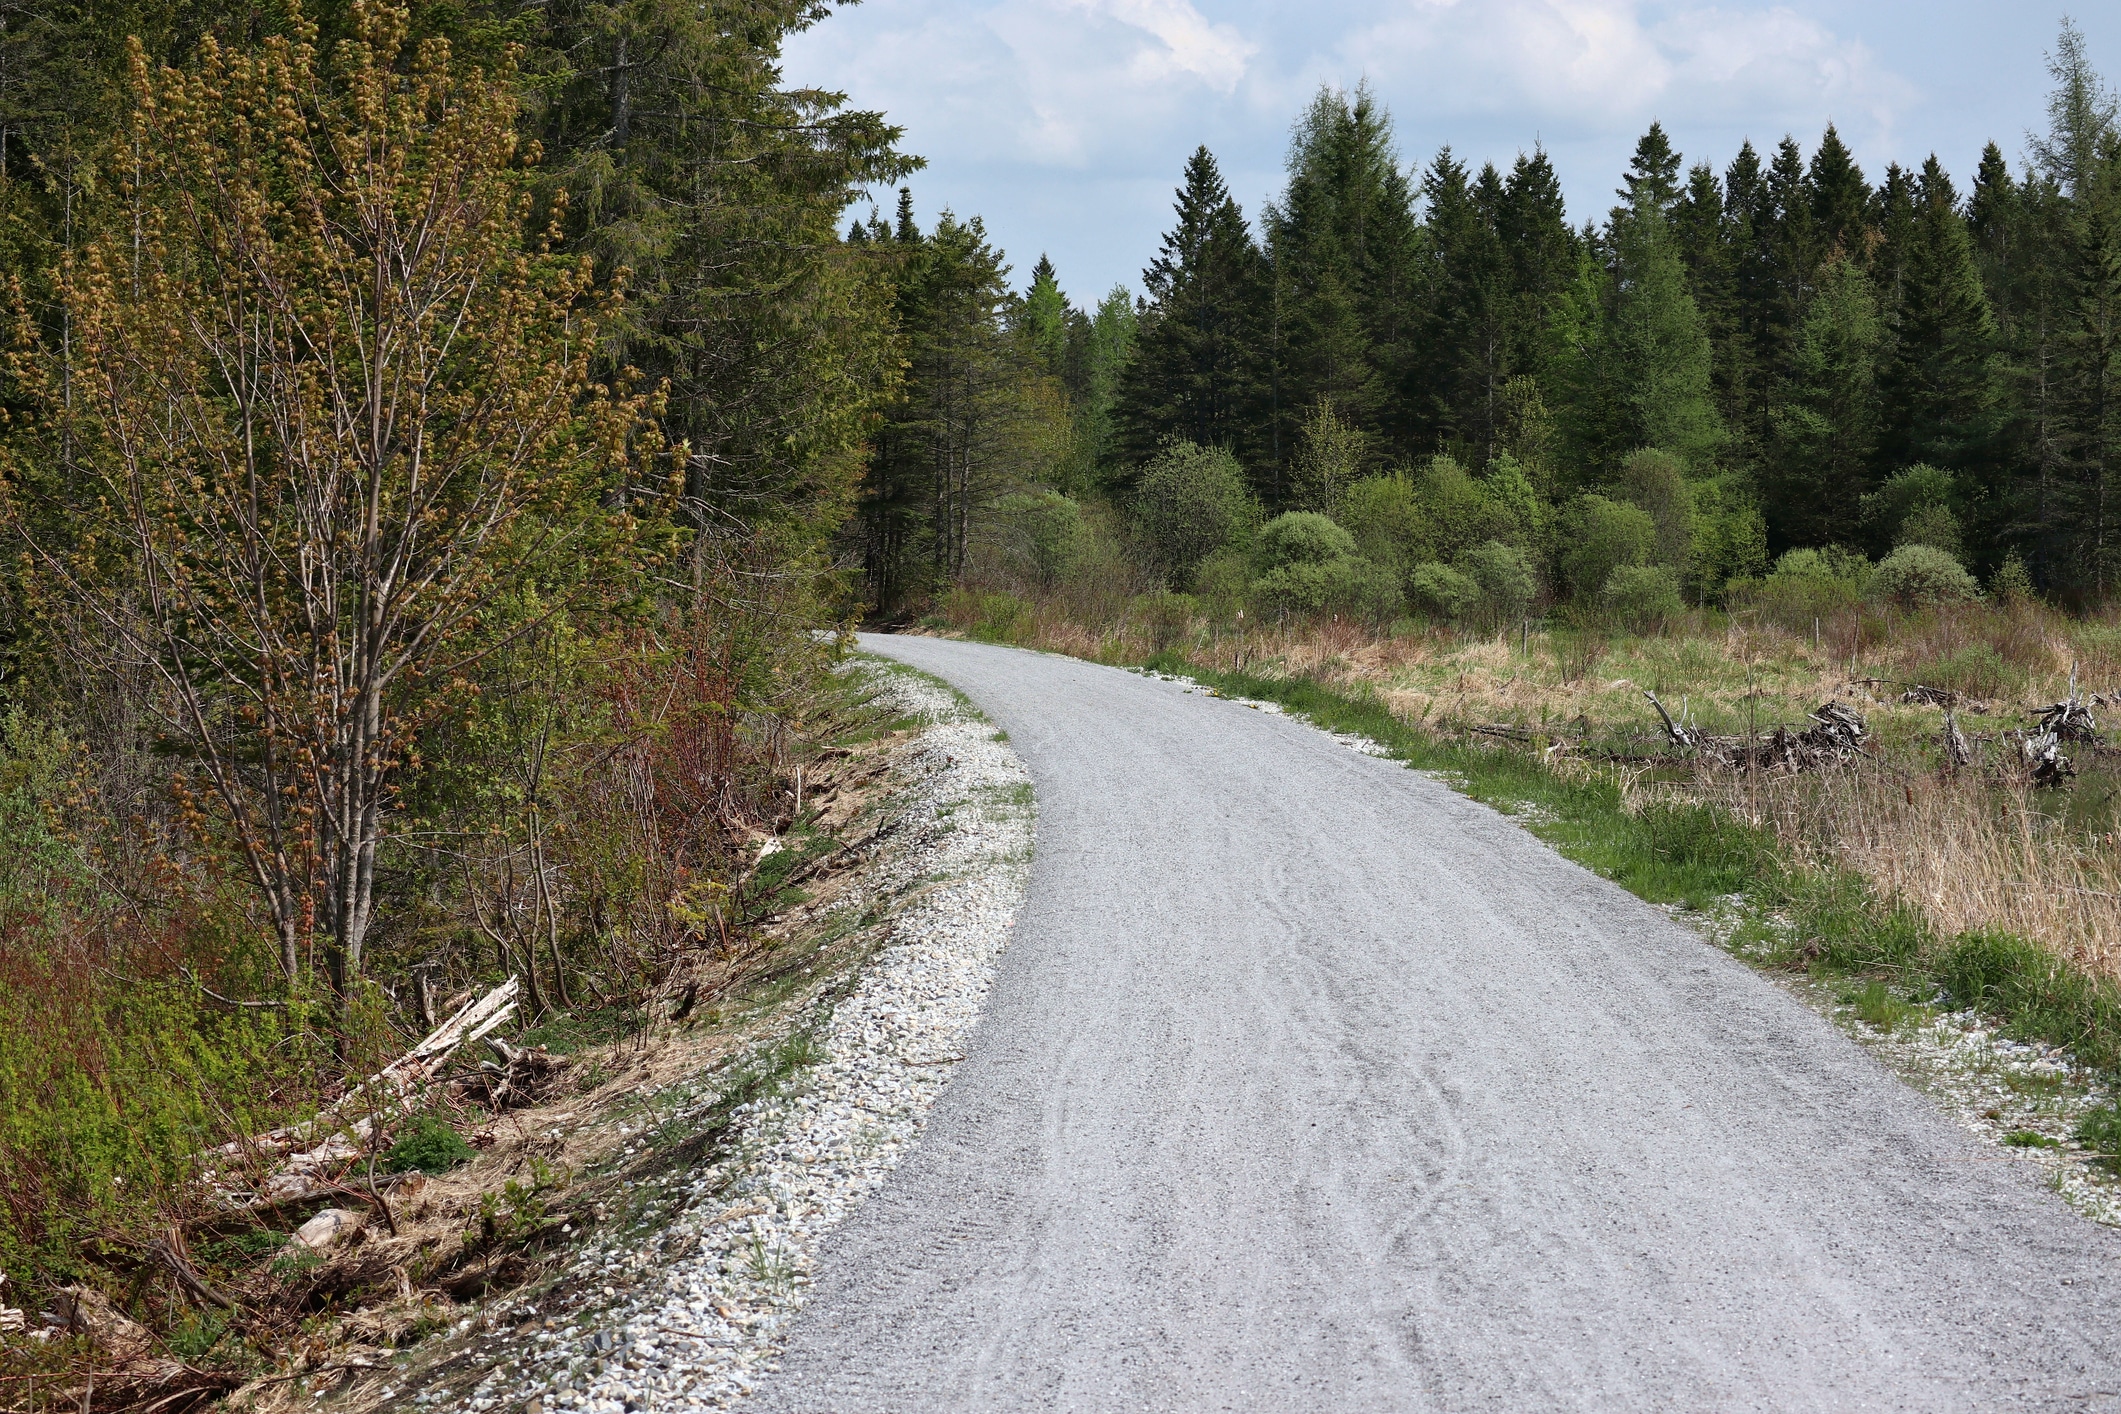 gravel bike lane in wooded area (lamoille valley rail trail) on old railroad right of way in vermont, usa (hiking, biking, cycling, recreational path)